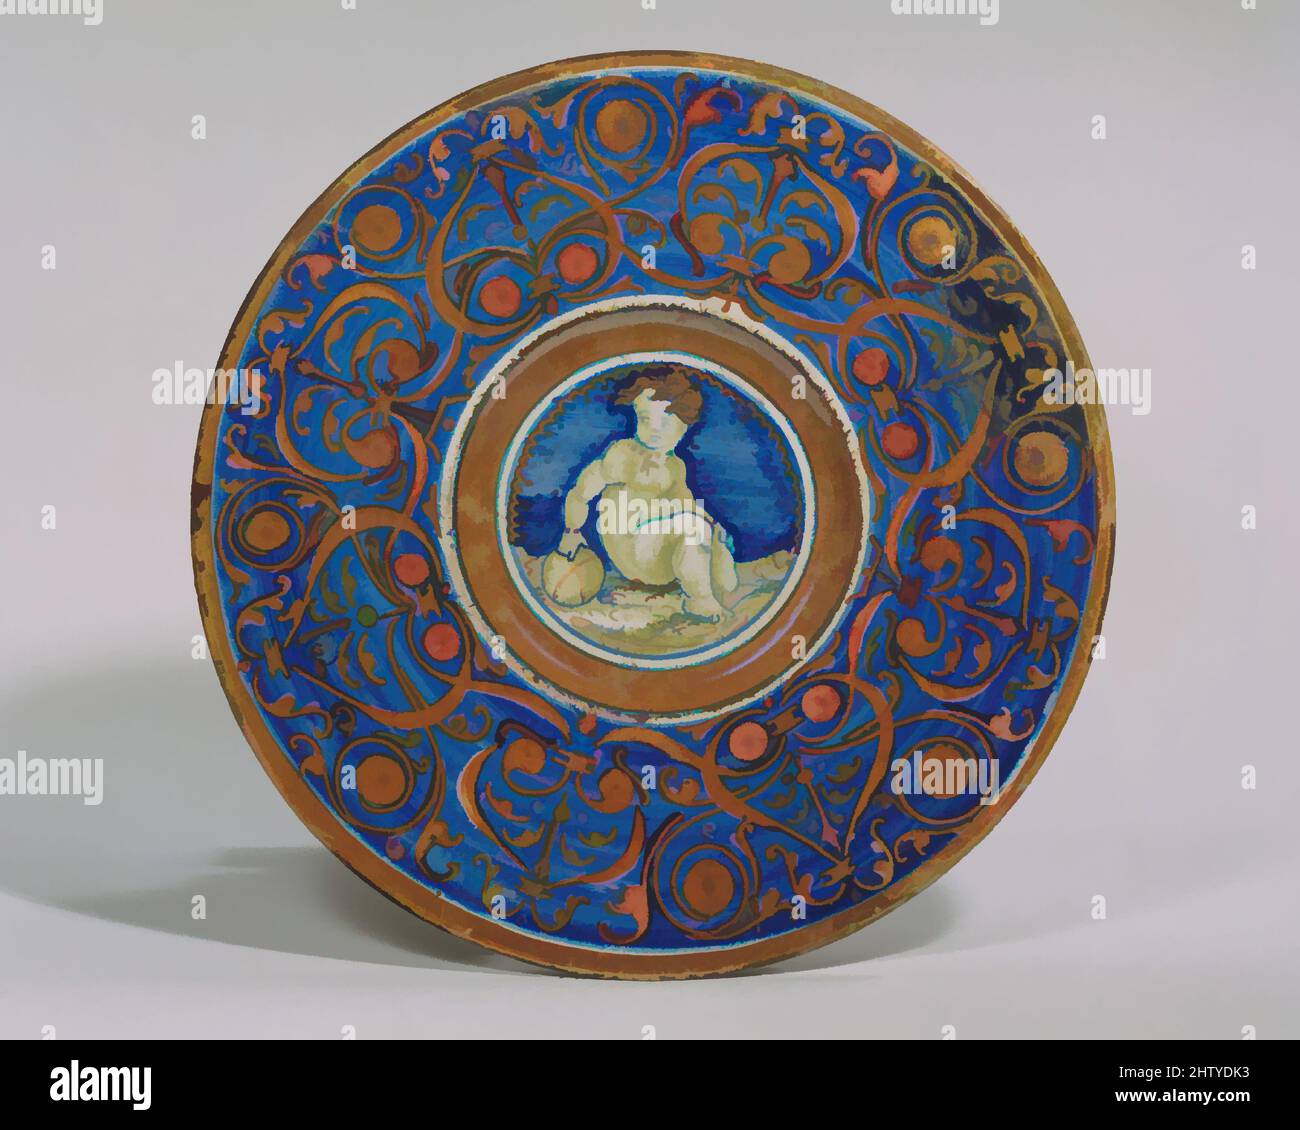 Art inspired by Plate (tagliere), 1532, Italian, Gubbio, Maiolica (tin-glazed earthenware), Diameter: 9 5/8 in. (24.4cm), Ceramics-Pottery, Classic works modernized by Artotop with a splash of modernity. Shapes, color and value, eye-catching visual impact on art. Emotions through freedom of artworks in a contemporary way. A timeless message pursuing a wildly creative new direction. Artists turning to the digital medium and creating the Artotop NFT Stock Photo